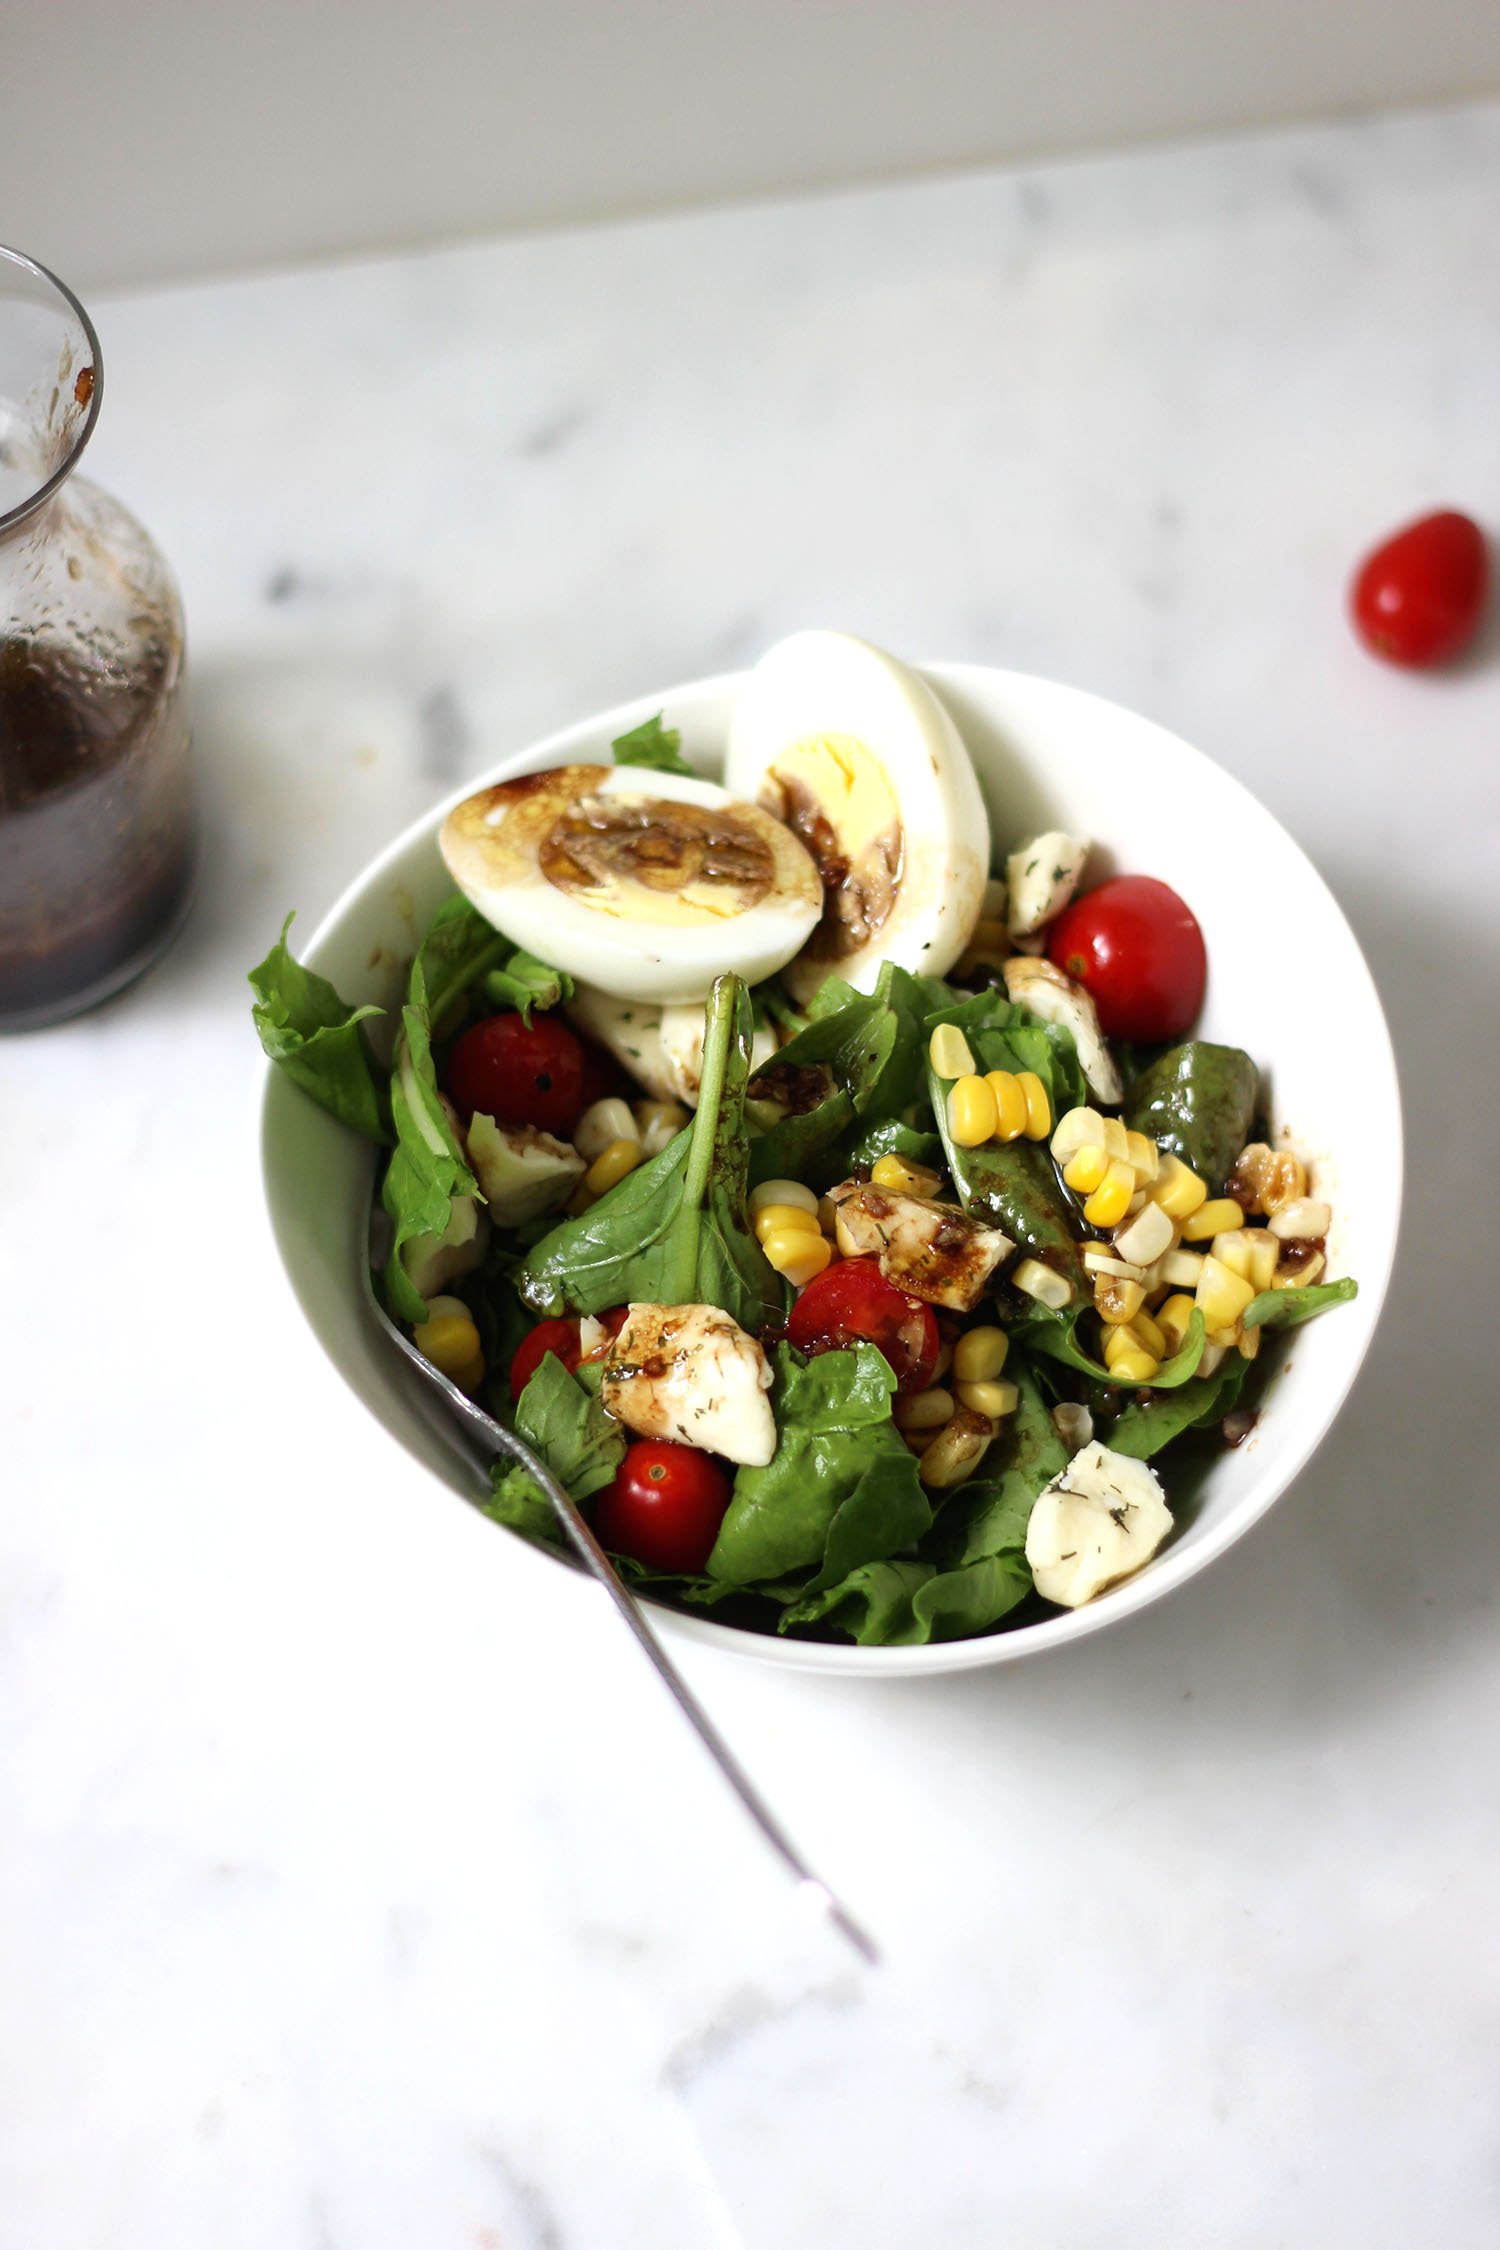 Simple Summer Salad with Corn, Tomatoes, and Balsamic Vinaigrette